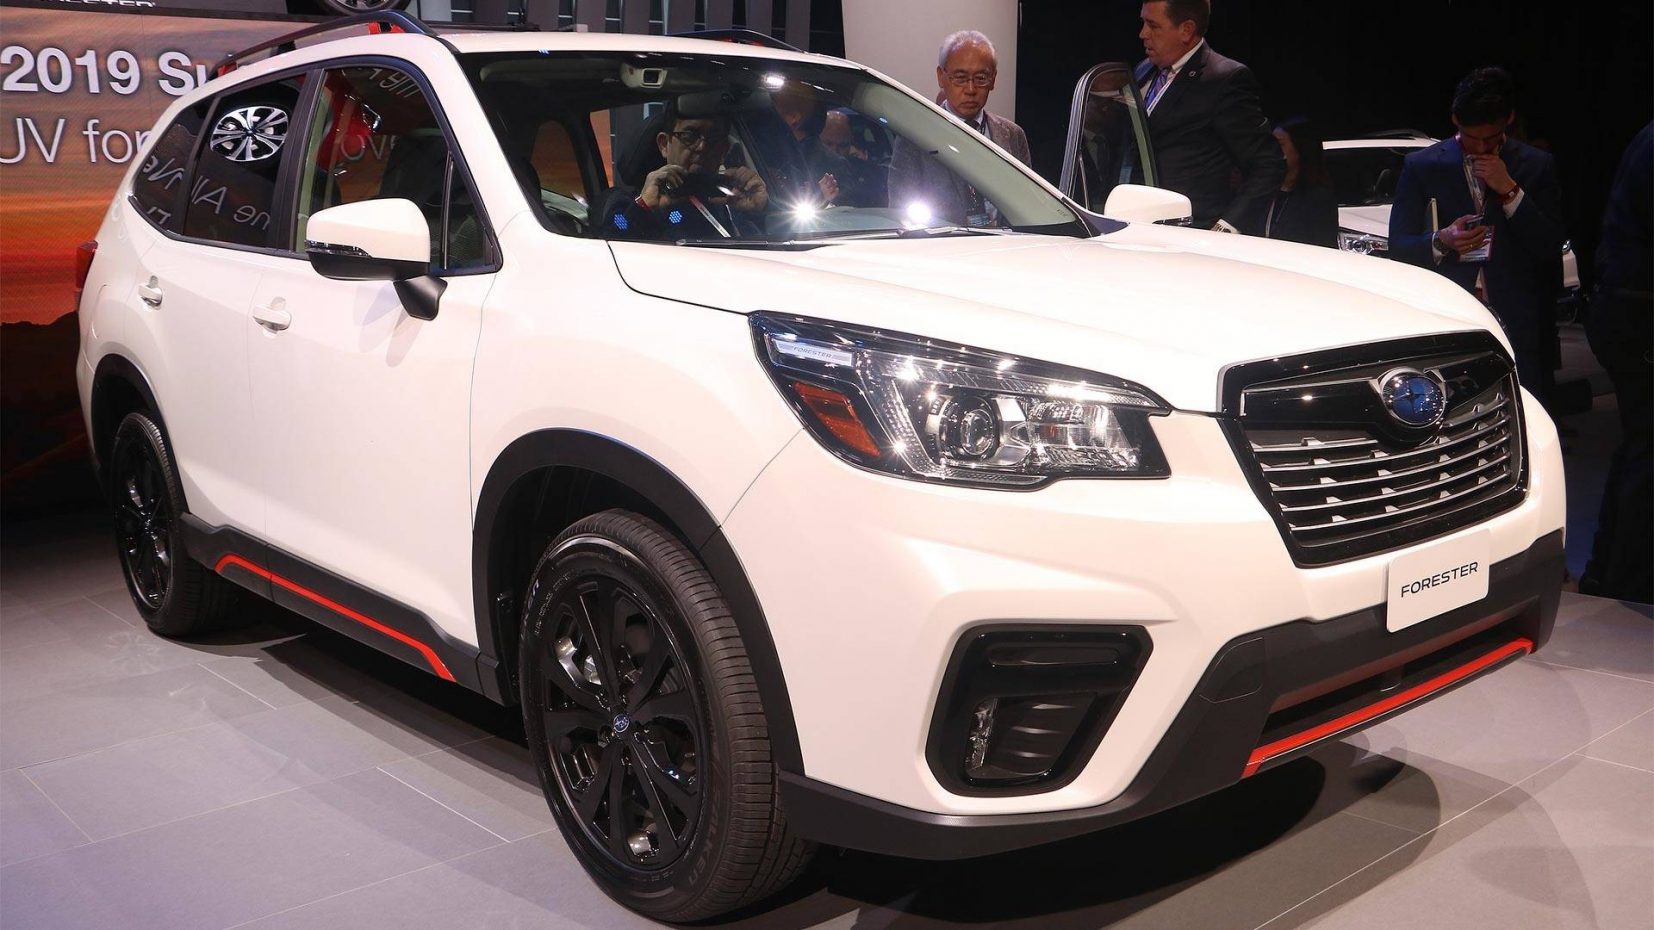 Best 2019 Subaru Forester Front High Resolution Wallpaper - Subaru Forester 2019 Velo - HD Wallpaper 